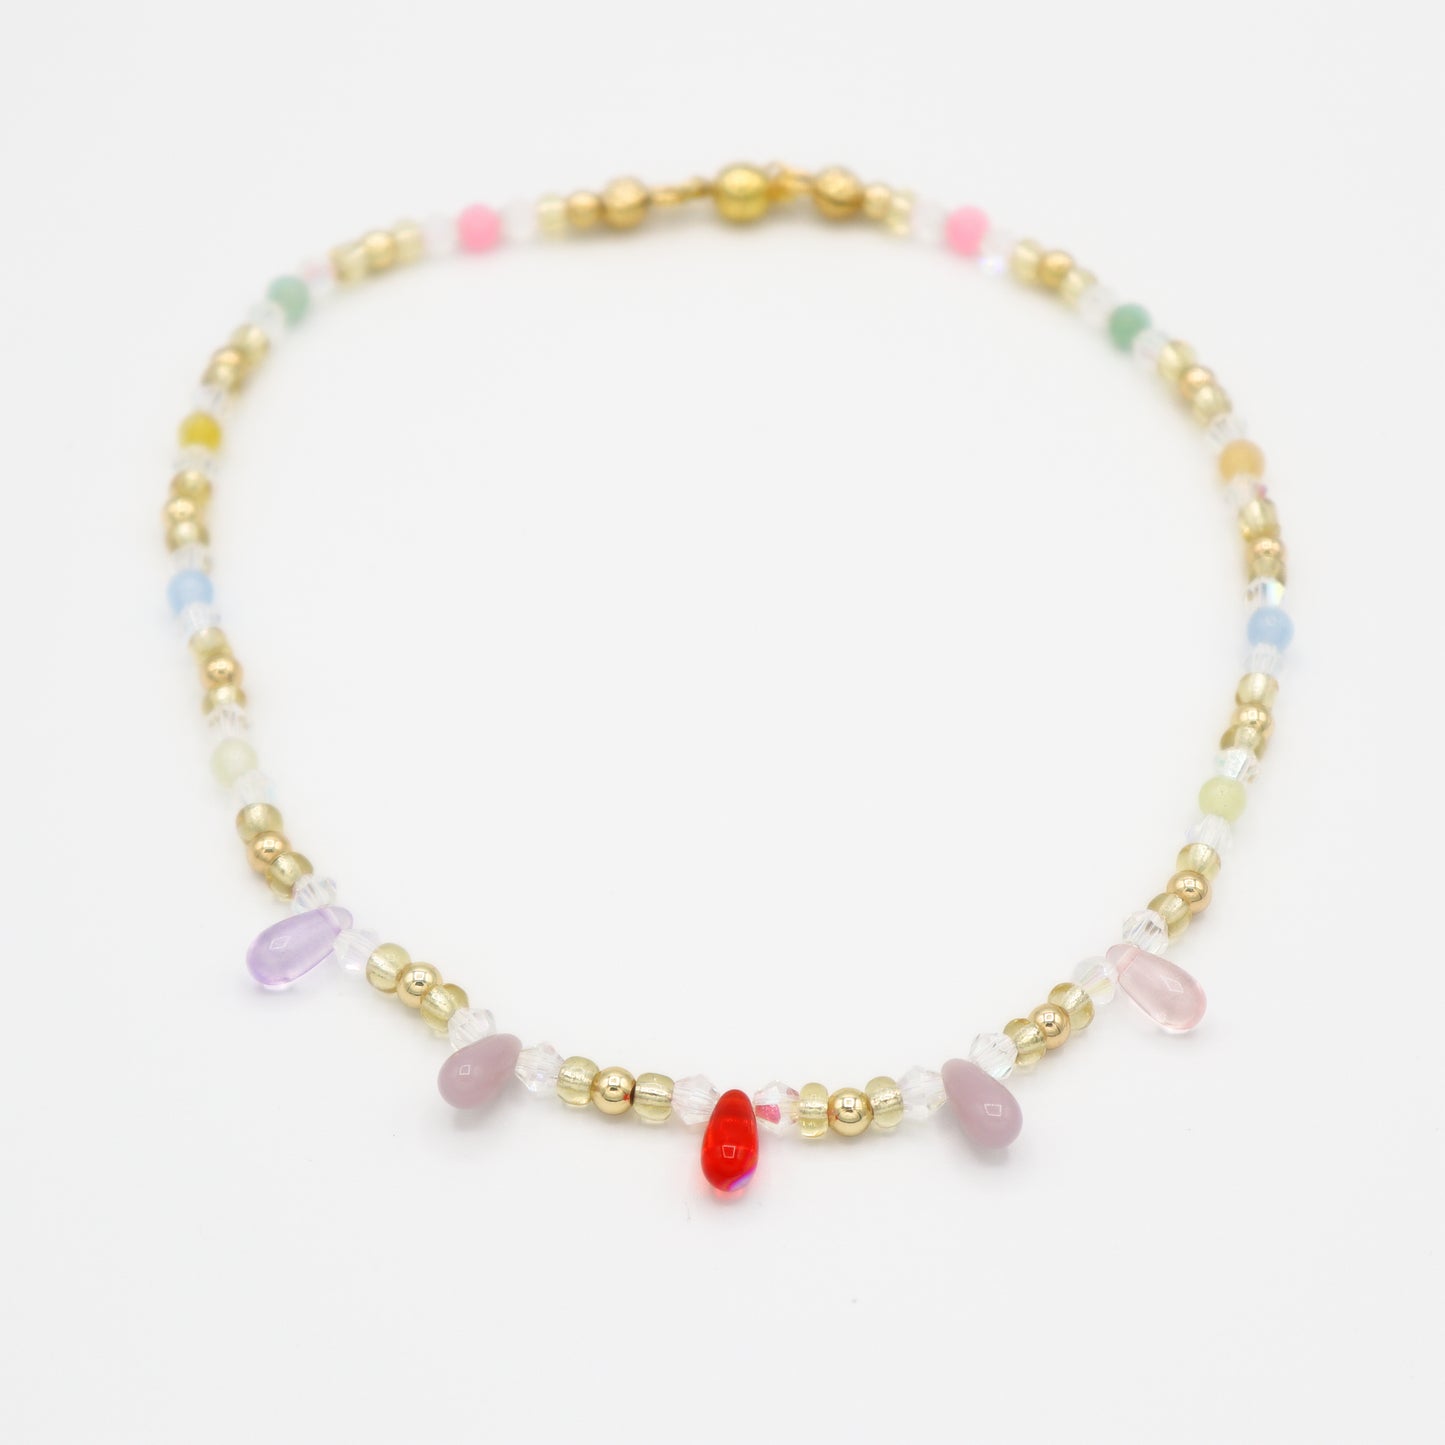 Roop Jewelry Aurora Choker. Colorful glass choker, made in Oakland, Ca. AAPI jewelry business. 